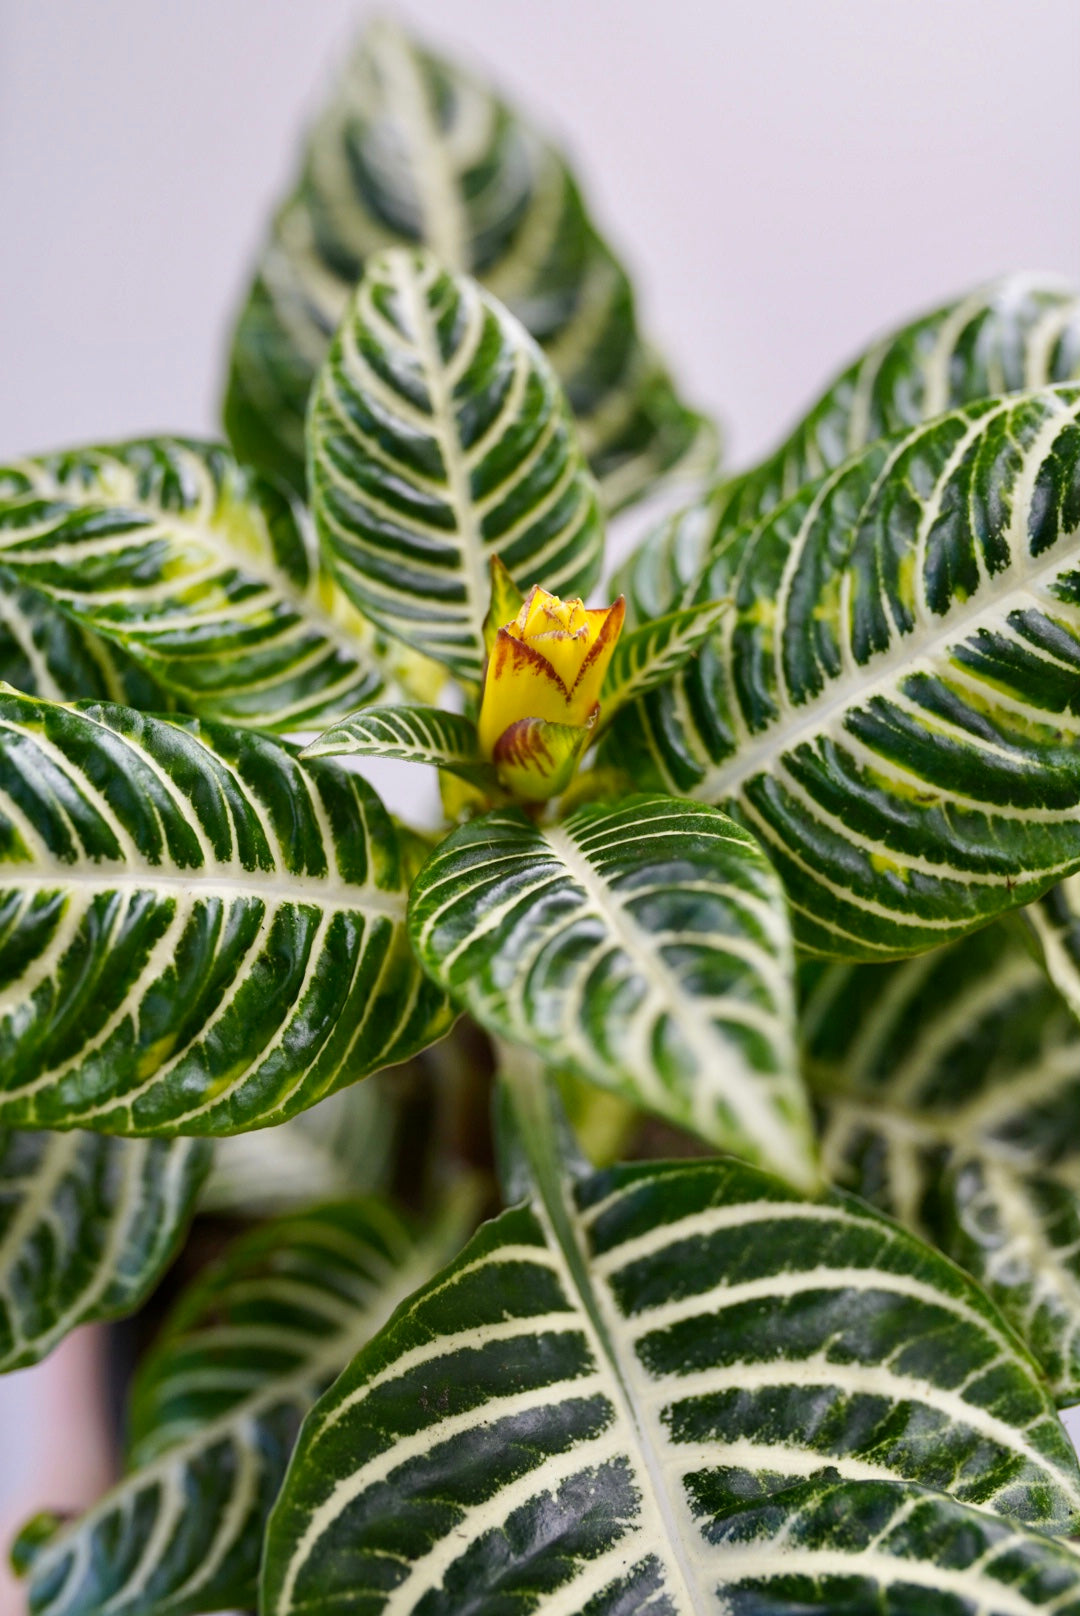 up close picture of zebra plant leaves and yellow bract